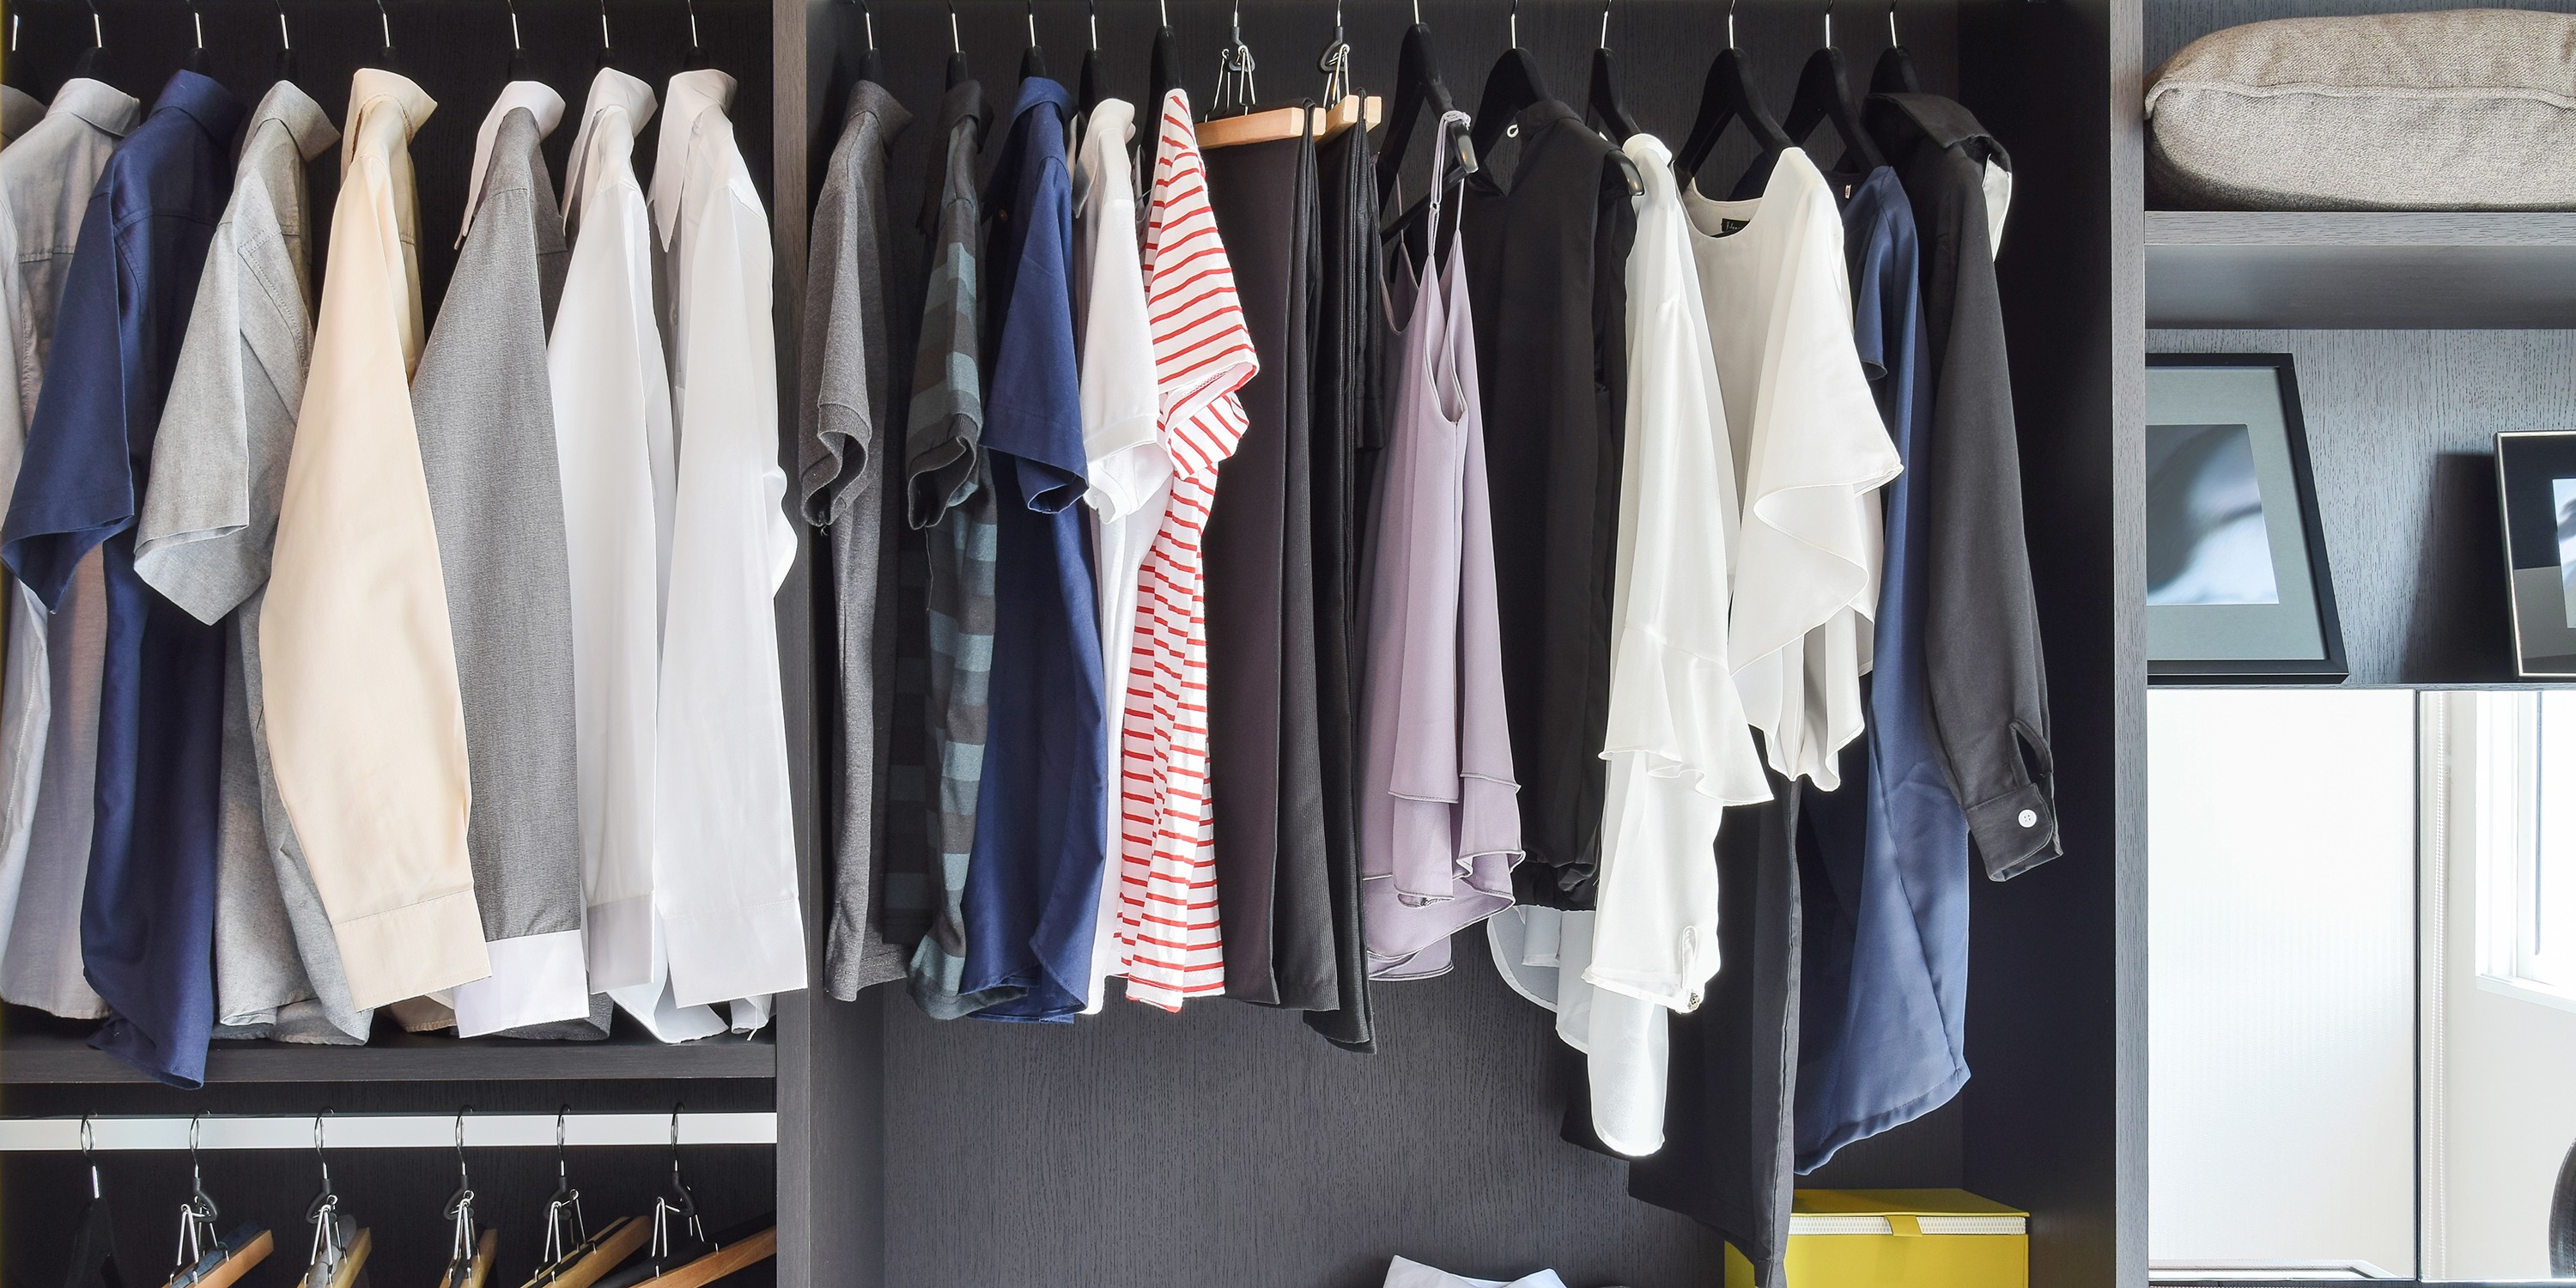 How I Doubled The Storage Space in Our Coat & Cleaning Closet